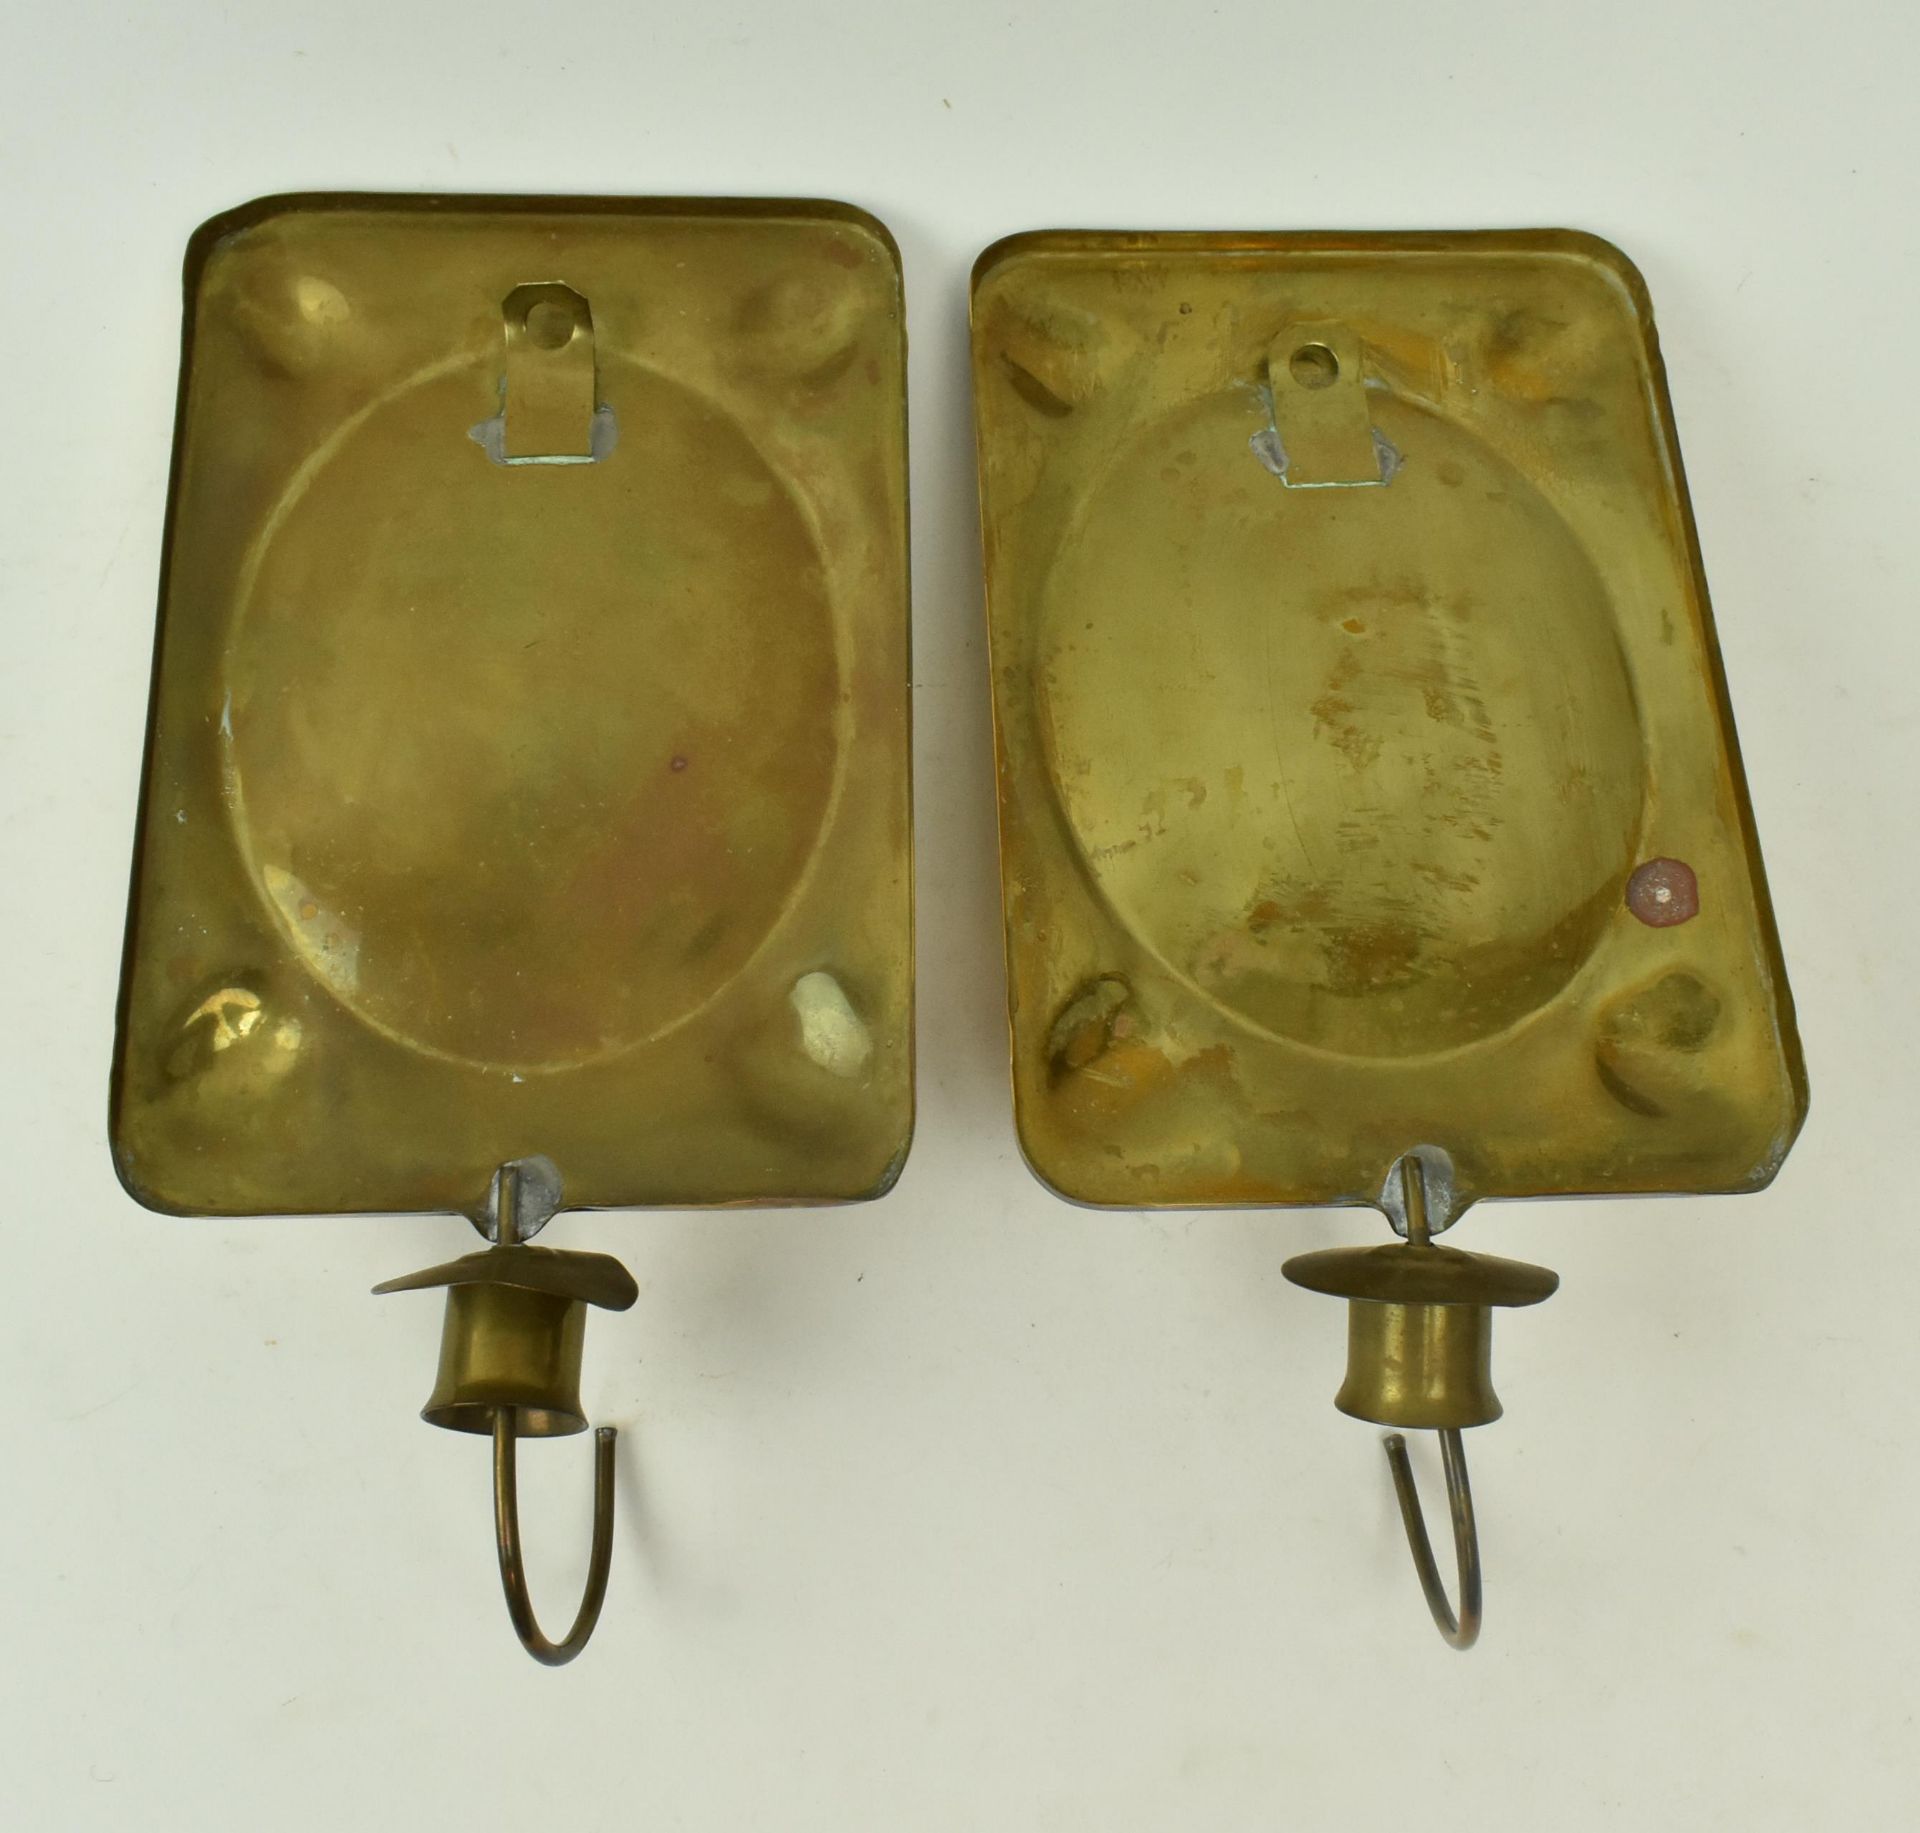 TWO VINTAGE BRASS WALL SCONCE CANDLESTICK HOLDERS - Image 4 of 4